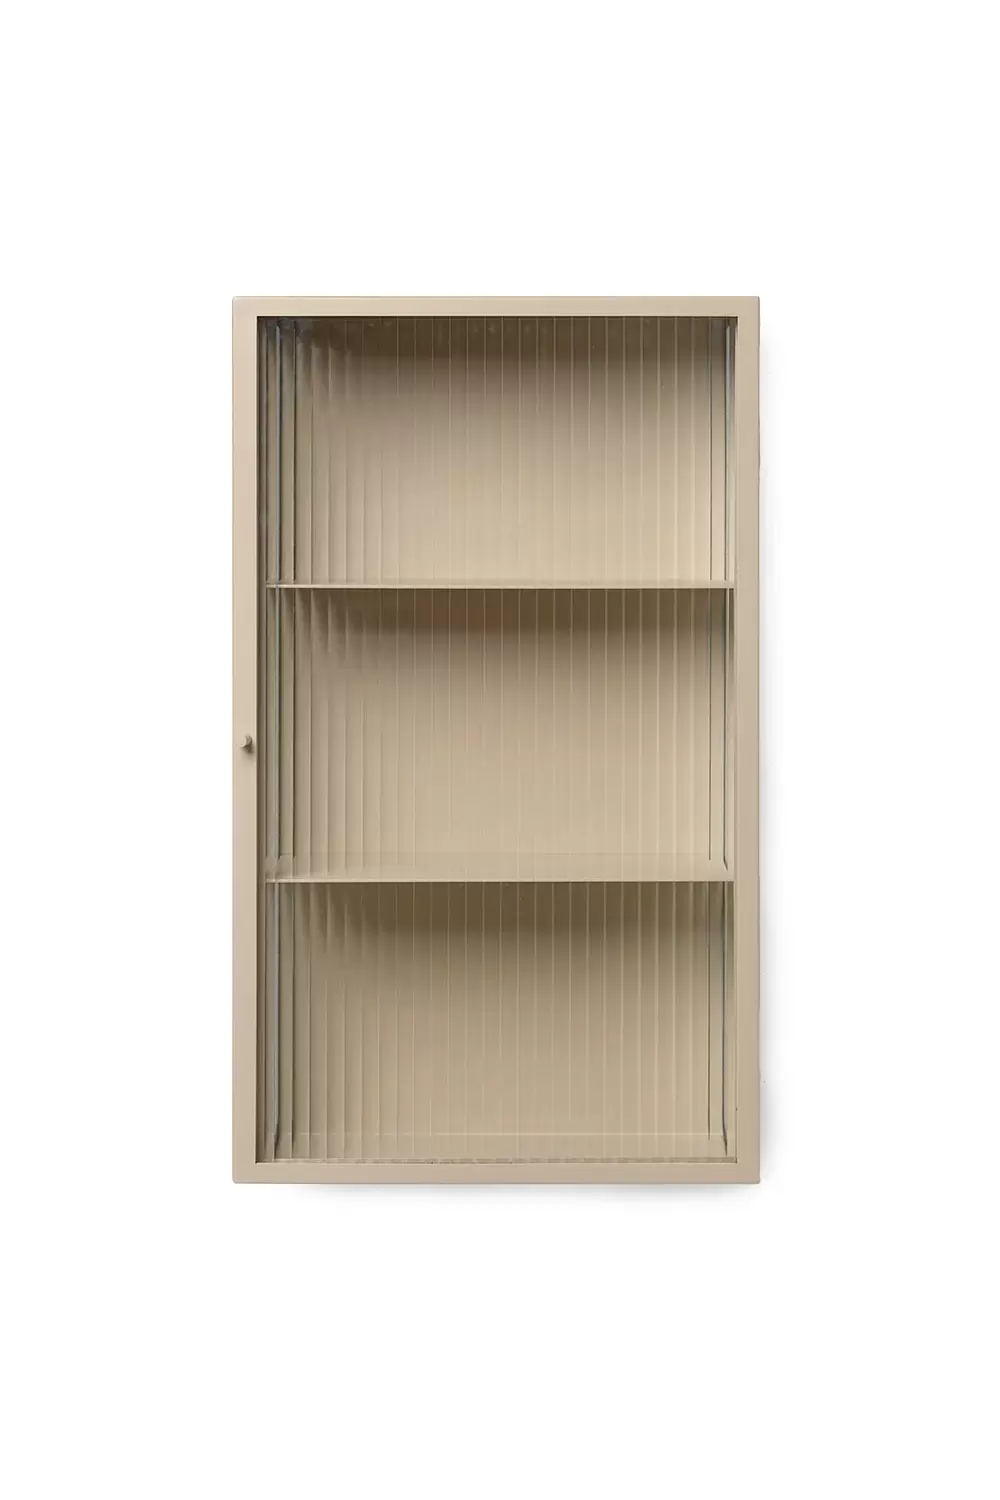 Haze Wall Cabinet - Reeded glass